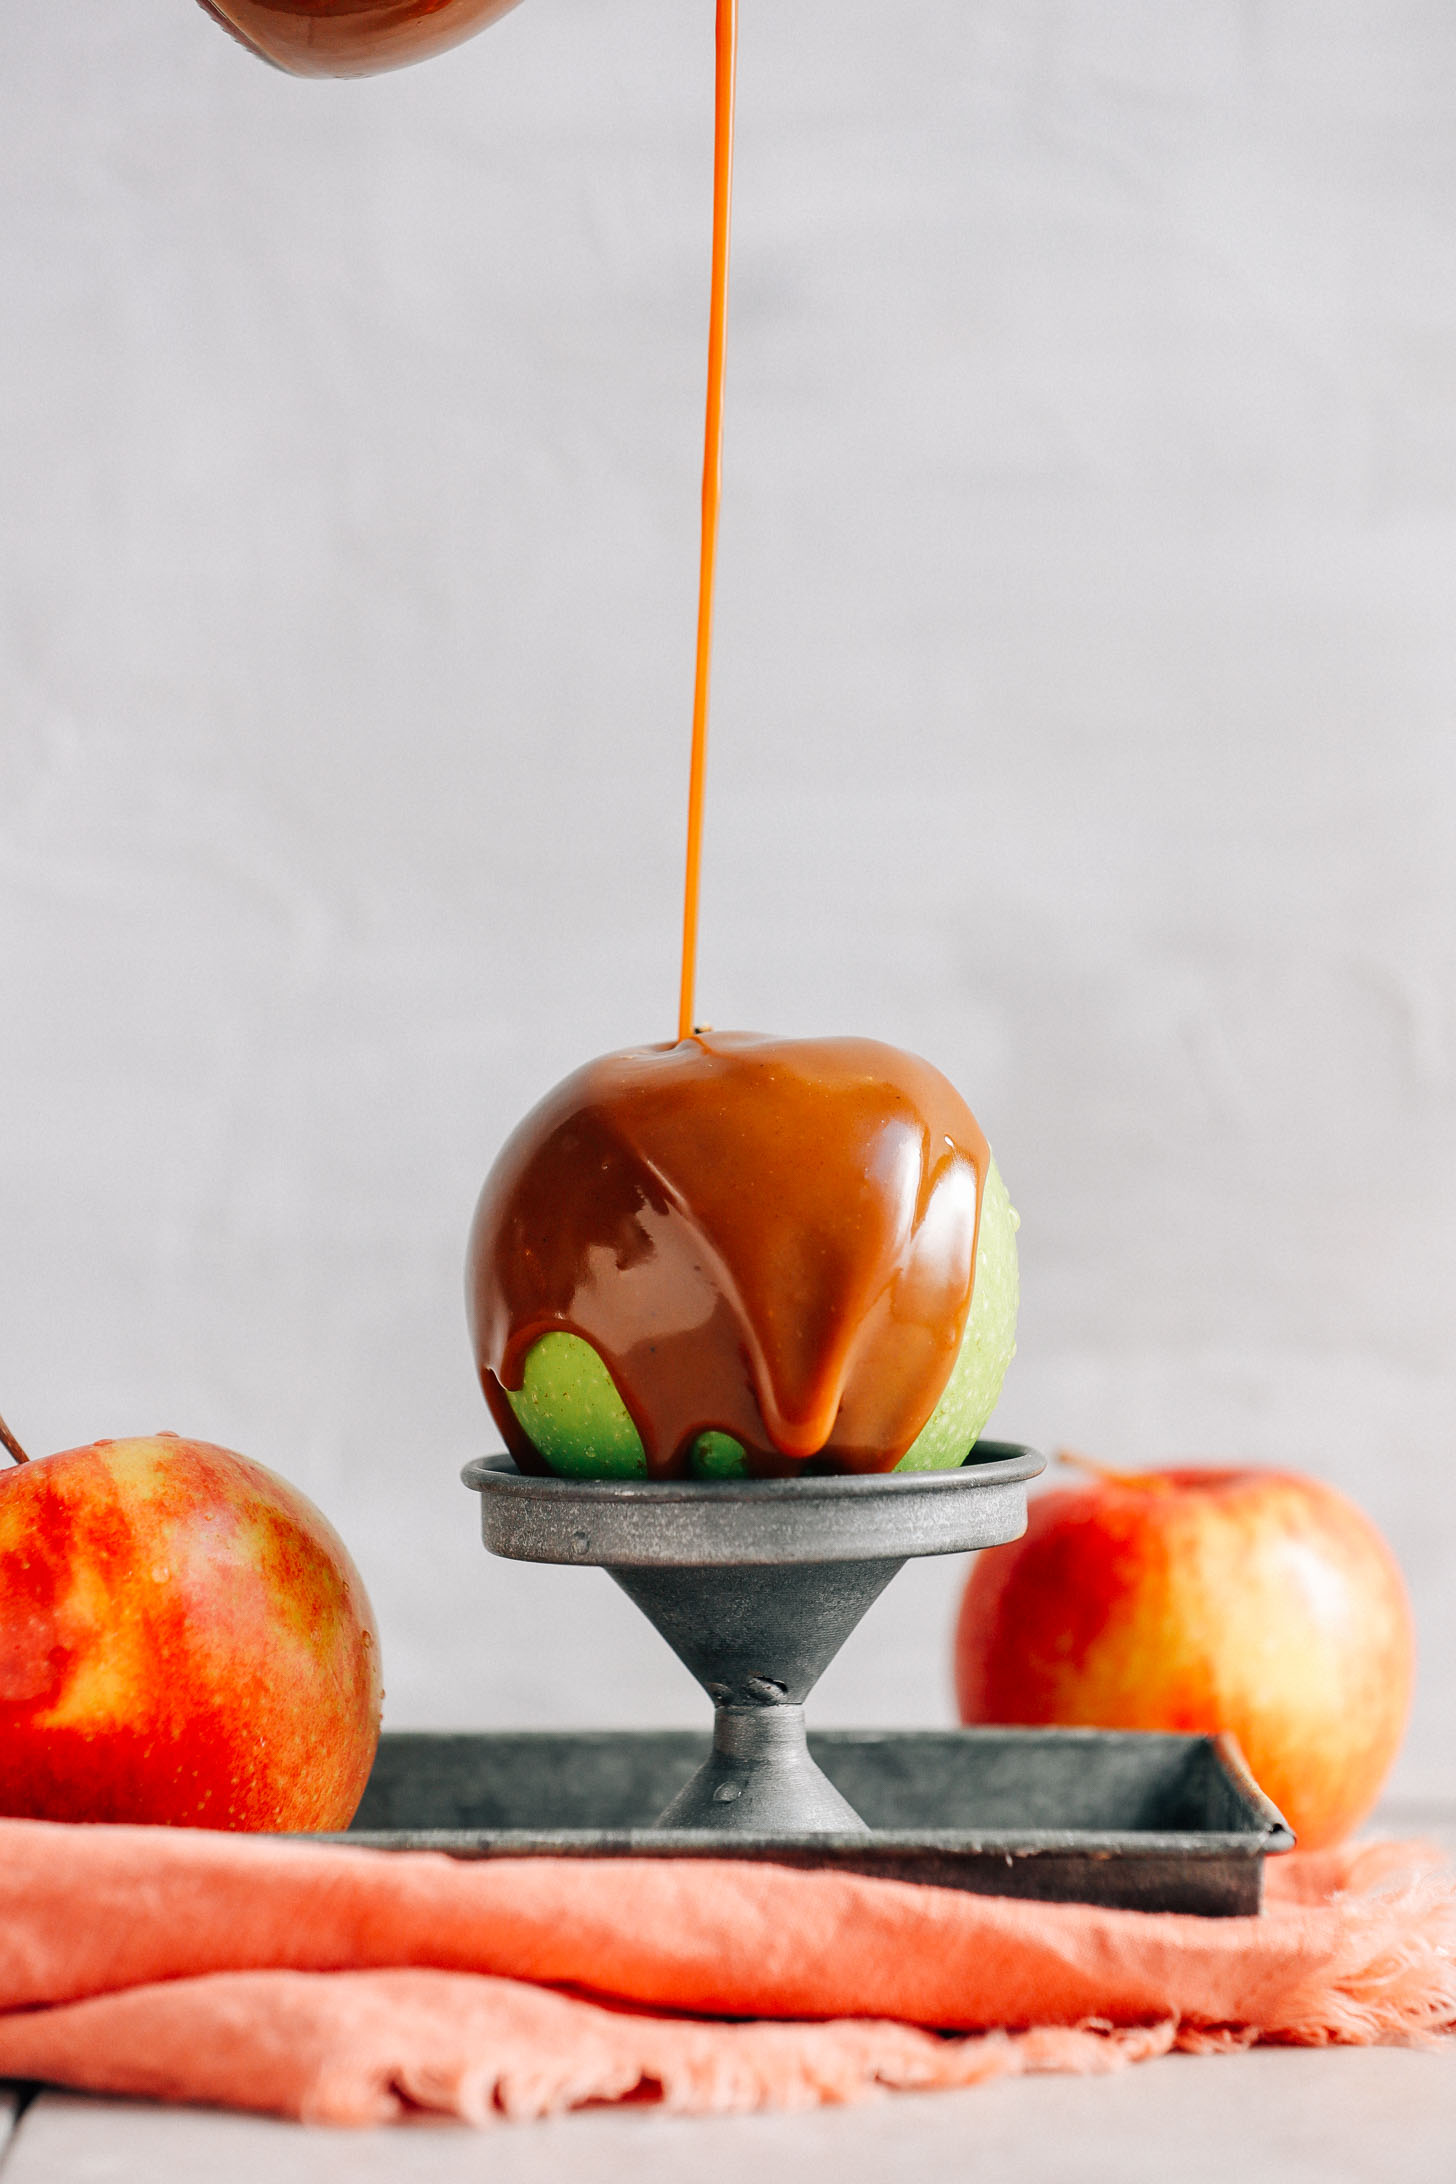 Close up shot drizzling Vegan Caramel Sauce onto a green apple perched on a metal stand